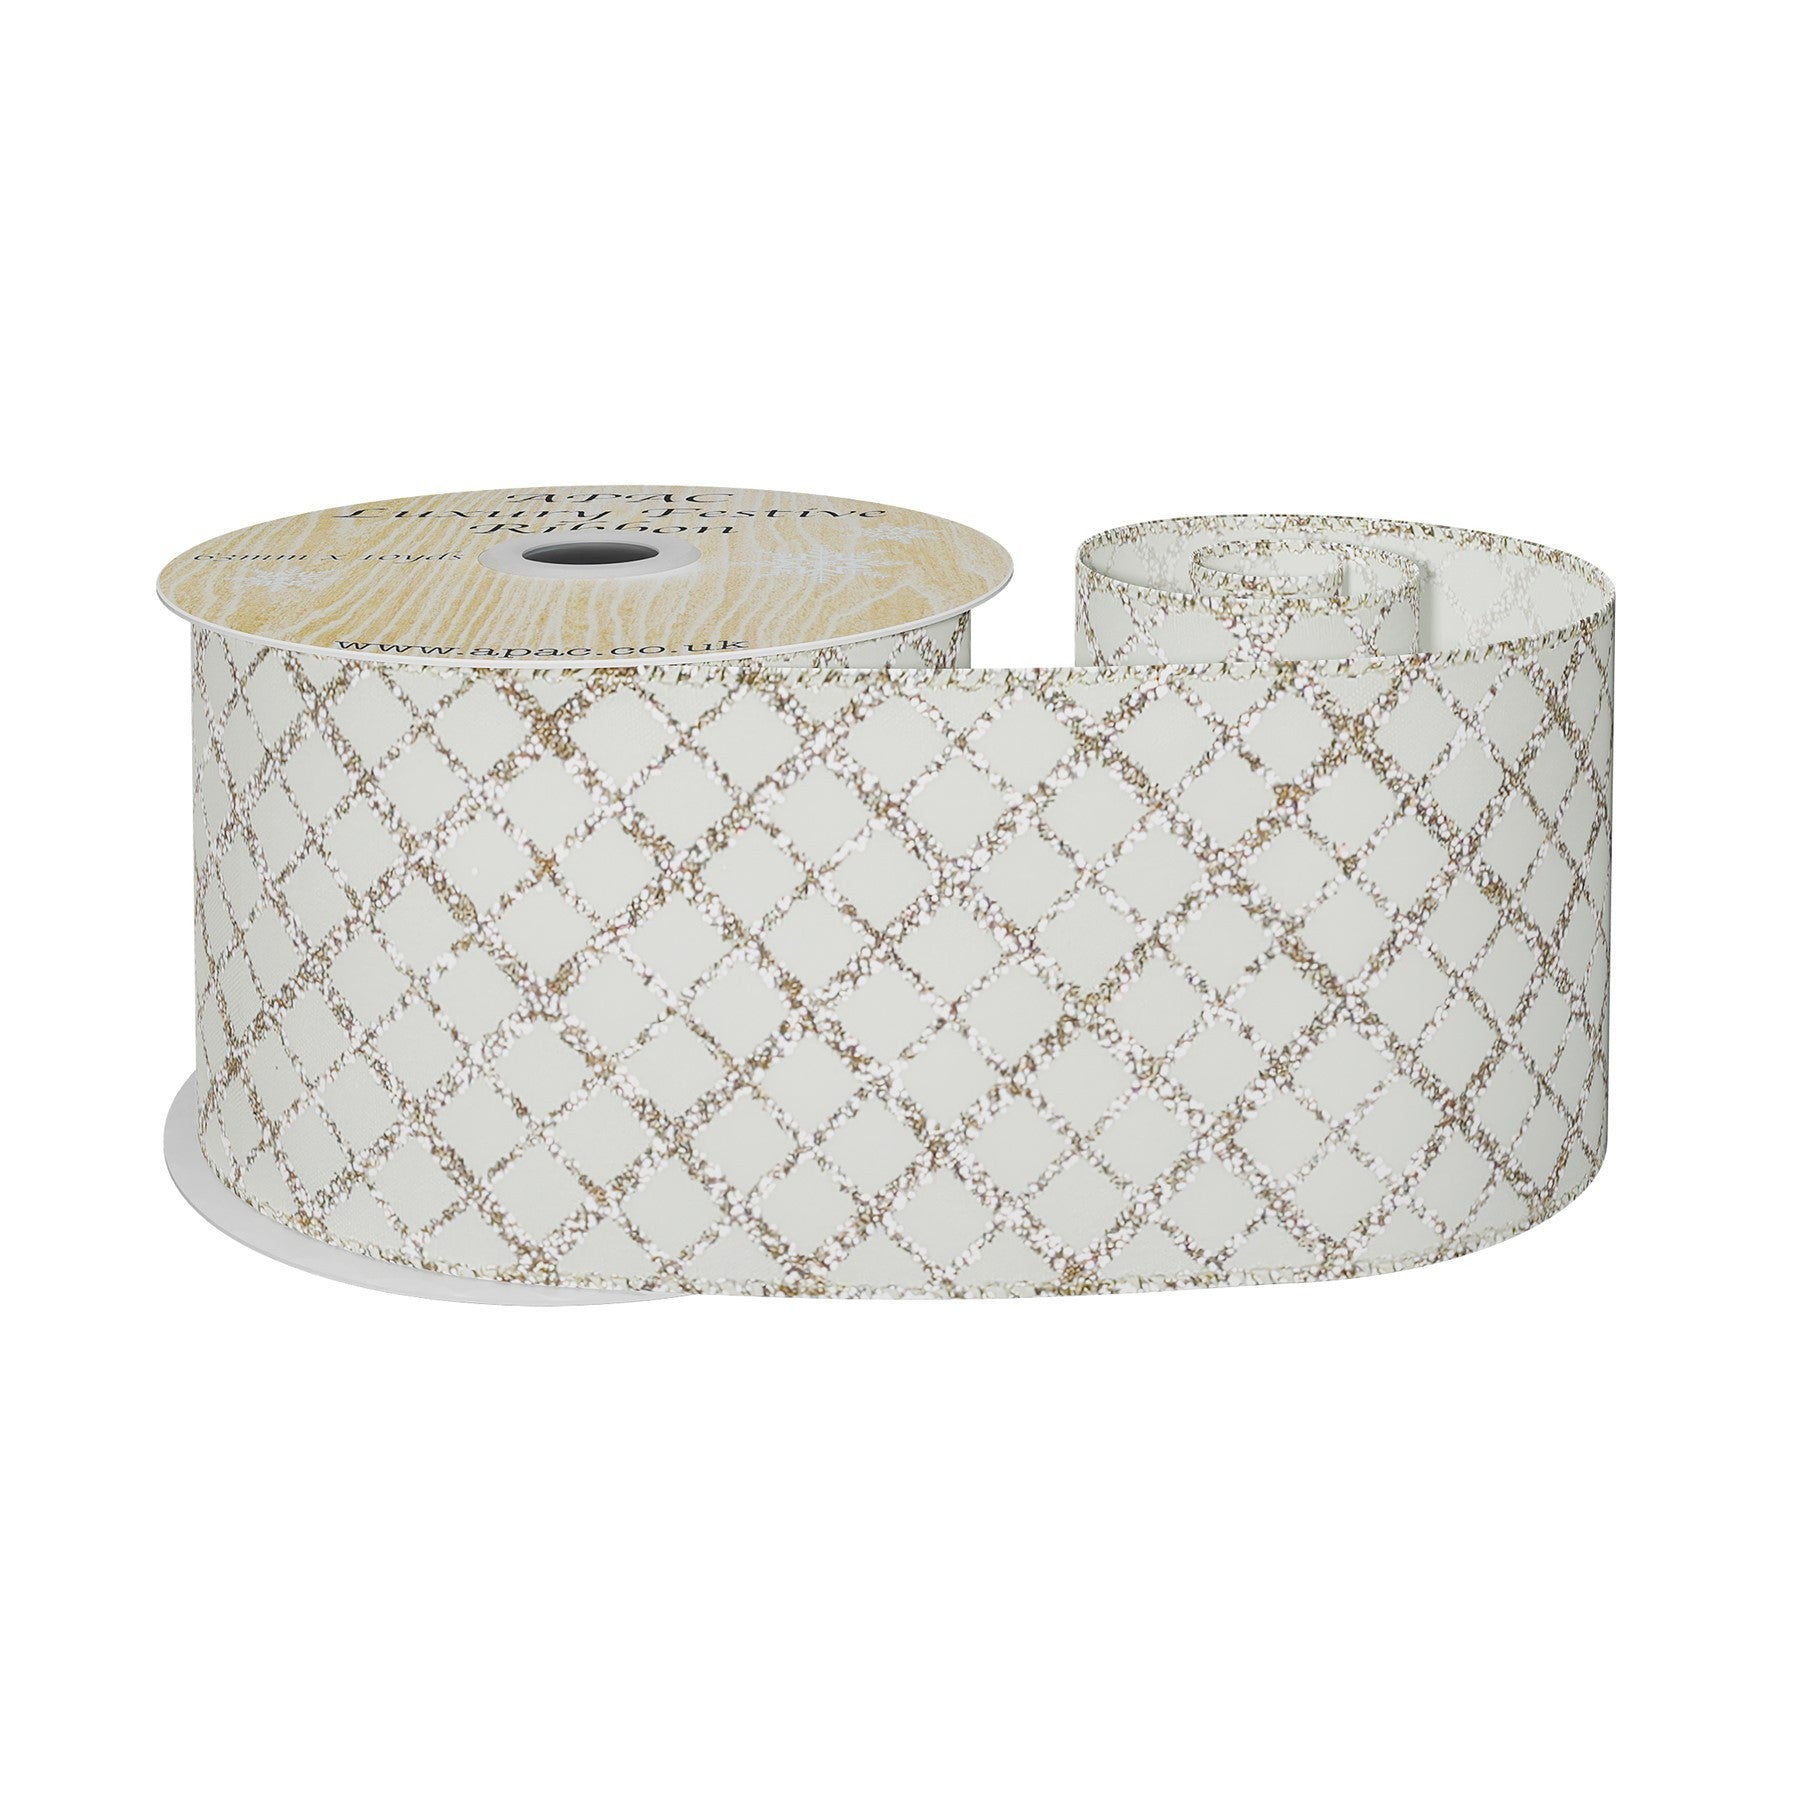 View Cream Wired Ribbon with Gold Diamond Detailing 63mm x 10 yards information